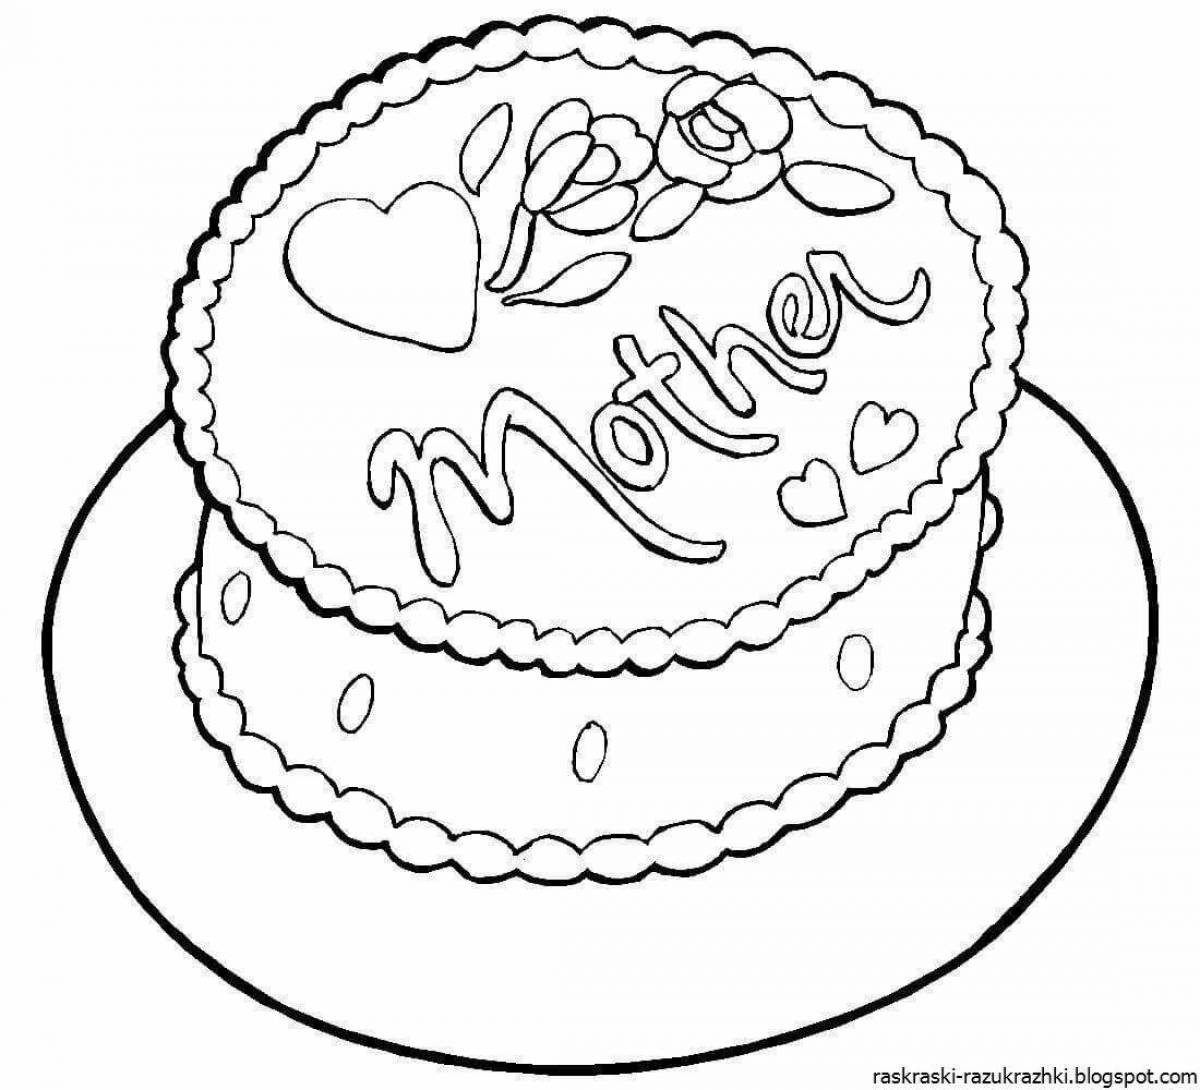 Shiny birthday cake coloring page